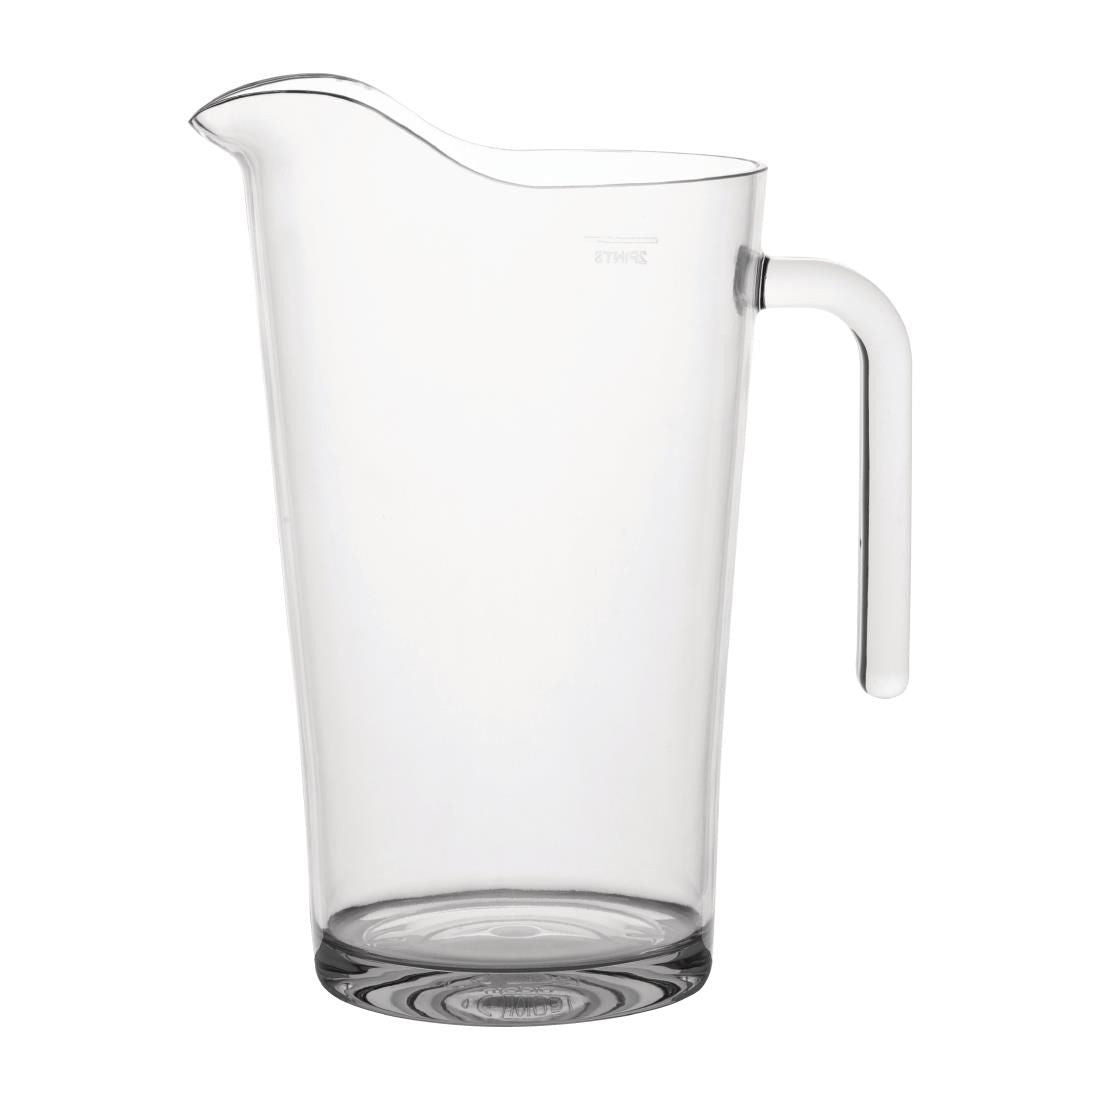 CY429 Utopia SAN Jugs 1.14Ltr CE Marked (Pack of 6) JD Catering Equipment Solutions Ltd